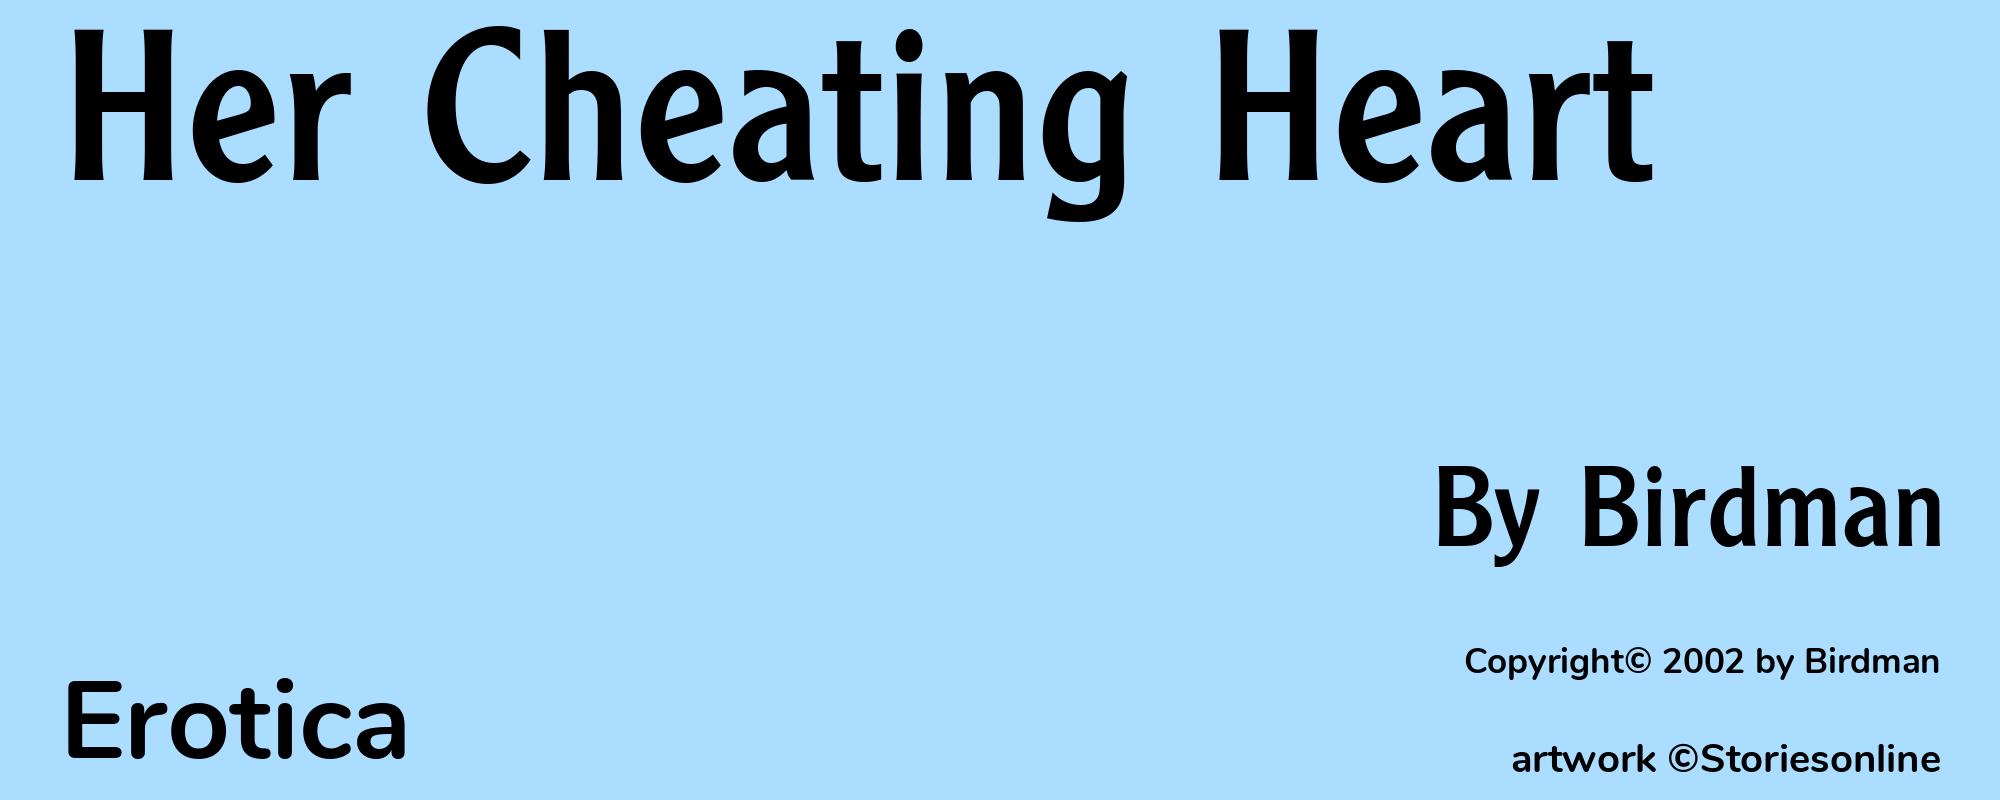 Her Cheating Heart - Cover